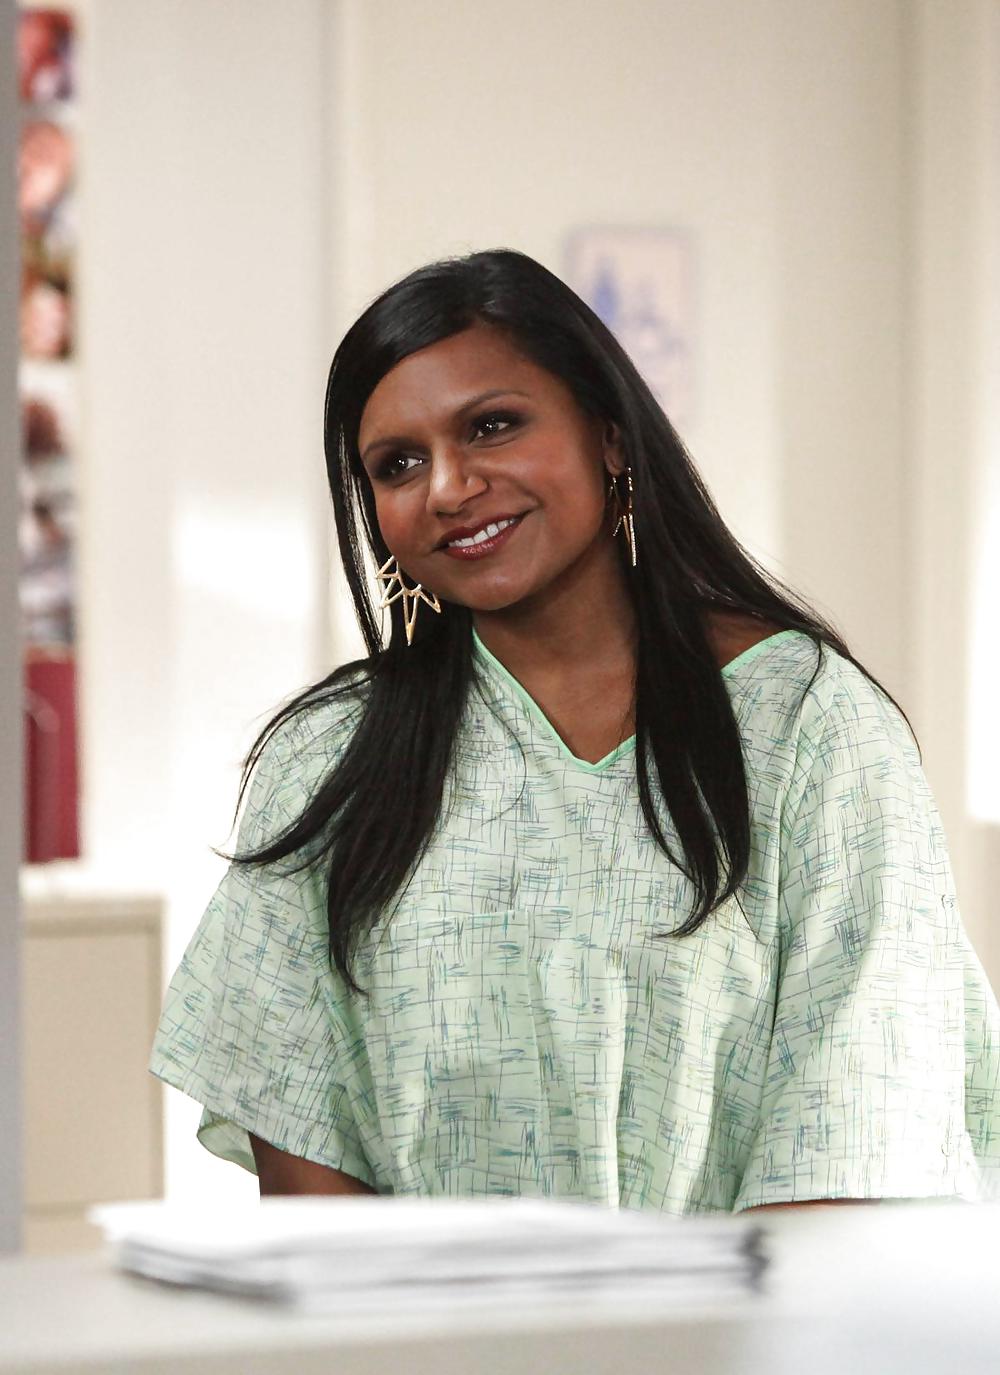 Hot Indian comedian Mindy Kaling - What would you do to her? #16250939